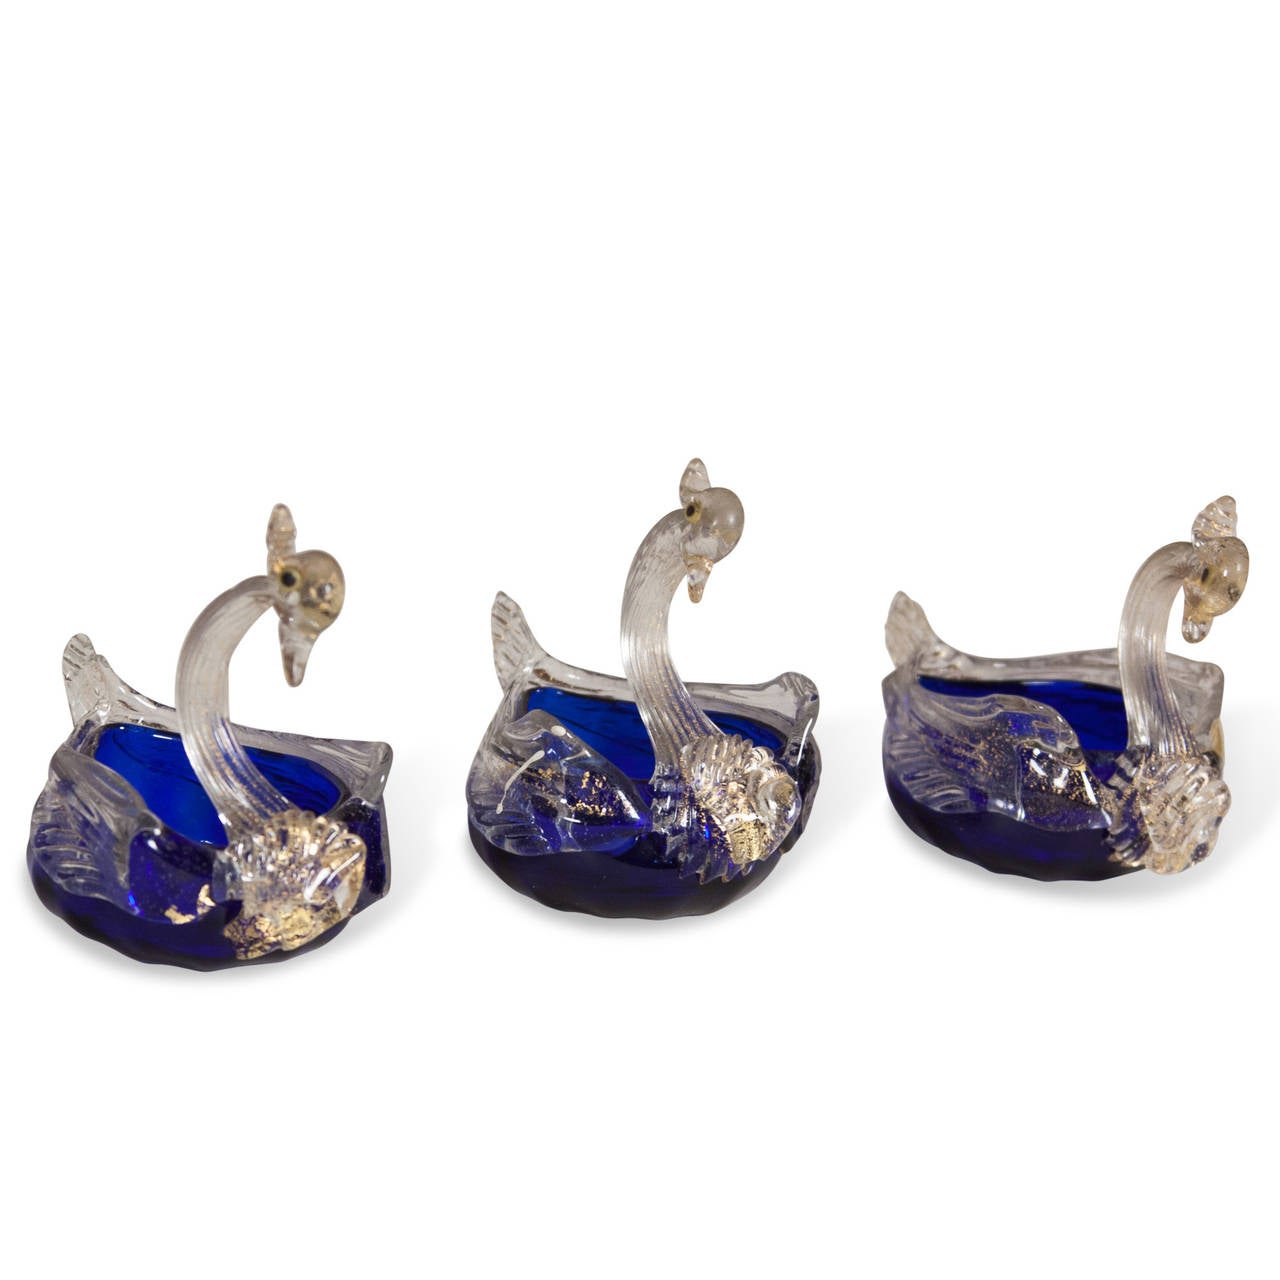 Set of three hand-blown glass swans, in clear and blue with gold inclusions, Murano, Italy 1960s. Height 3 in, length 4 in, width 2 1/2 in. (Item #2174)